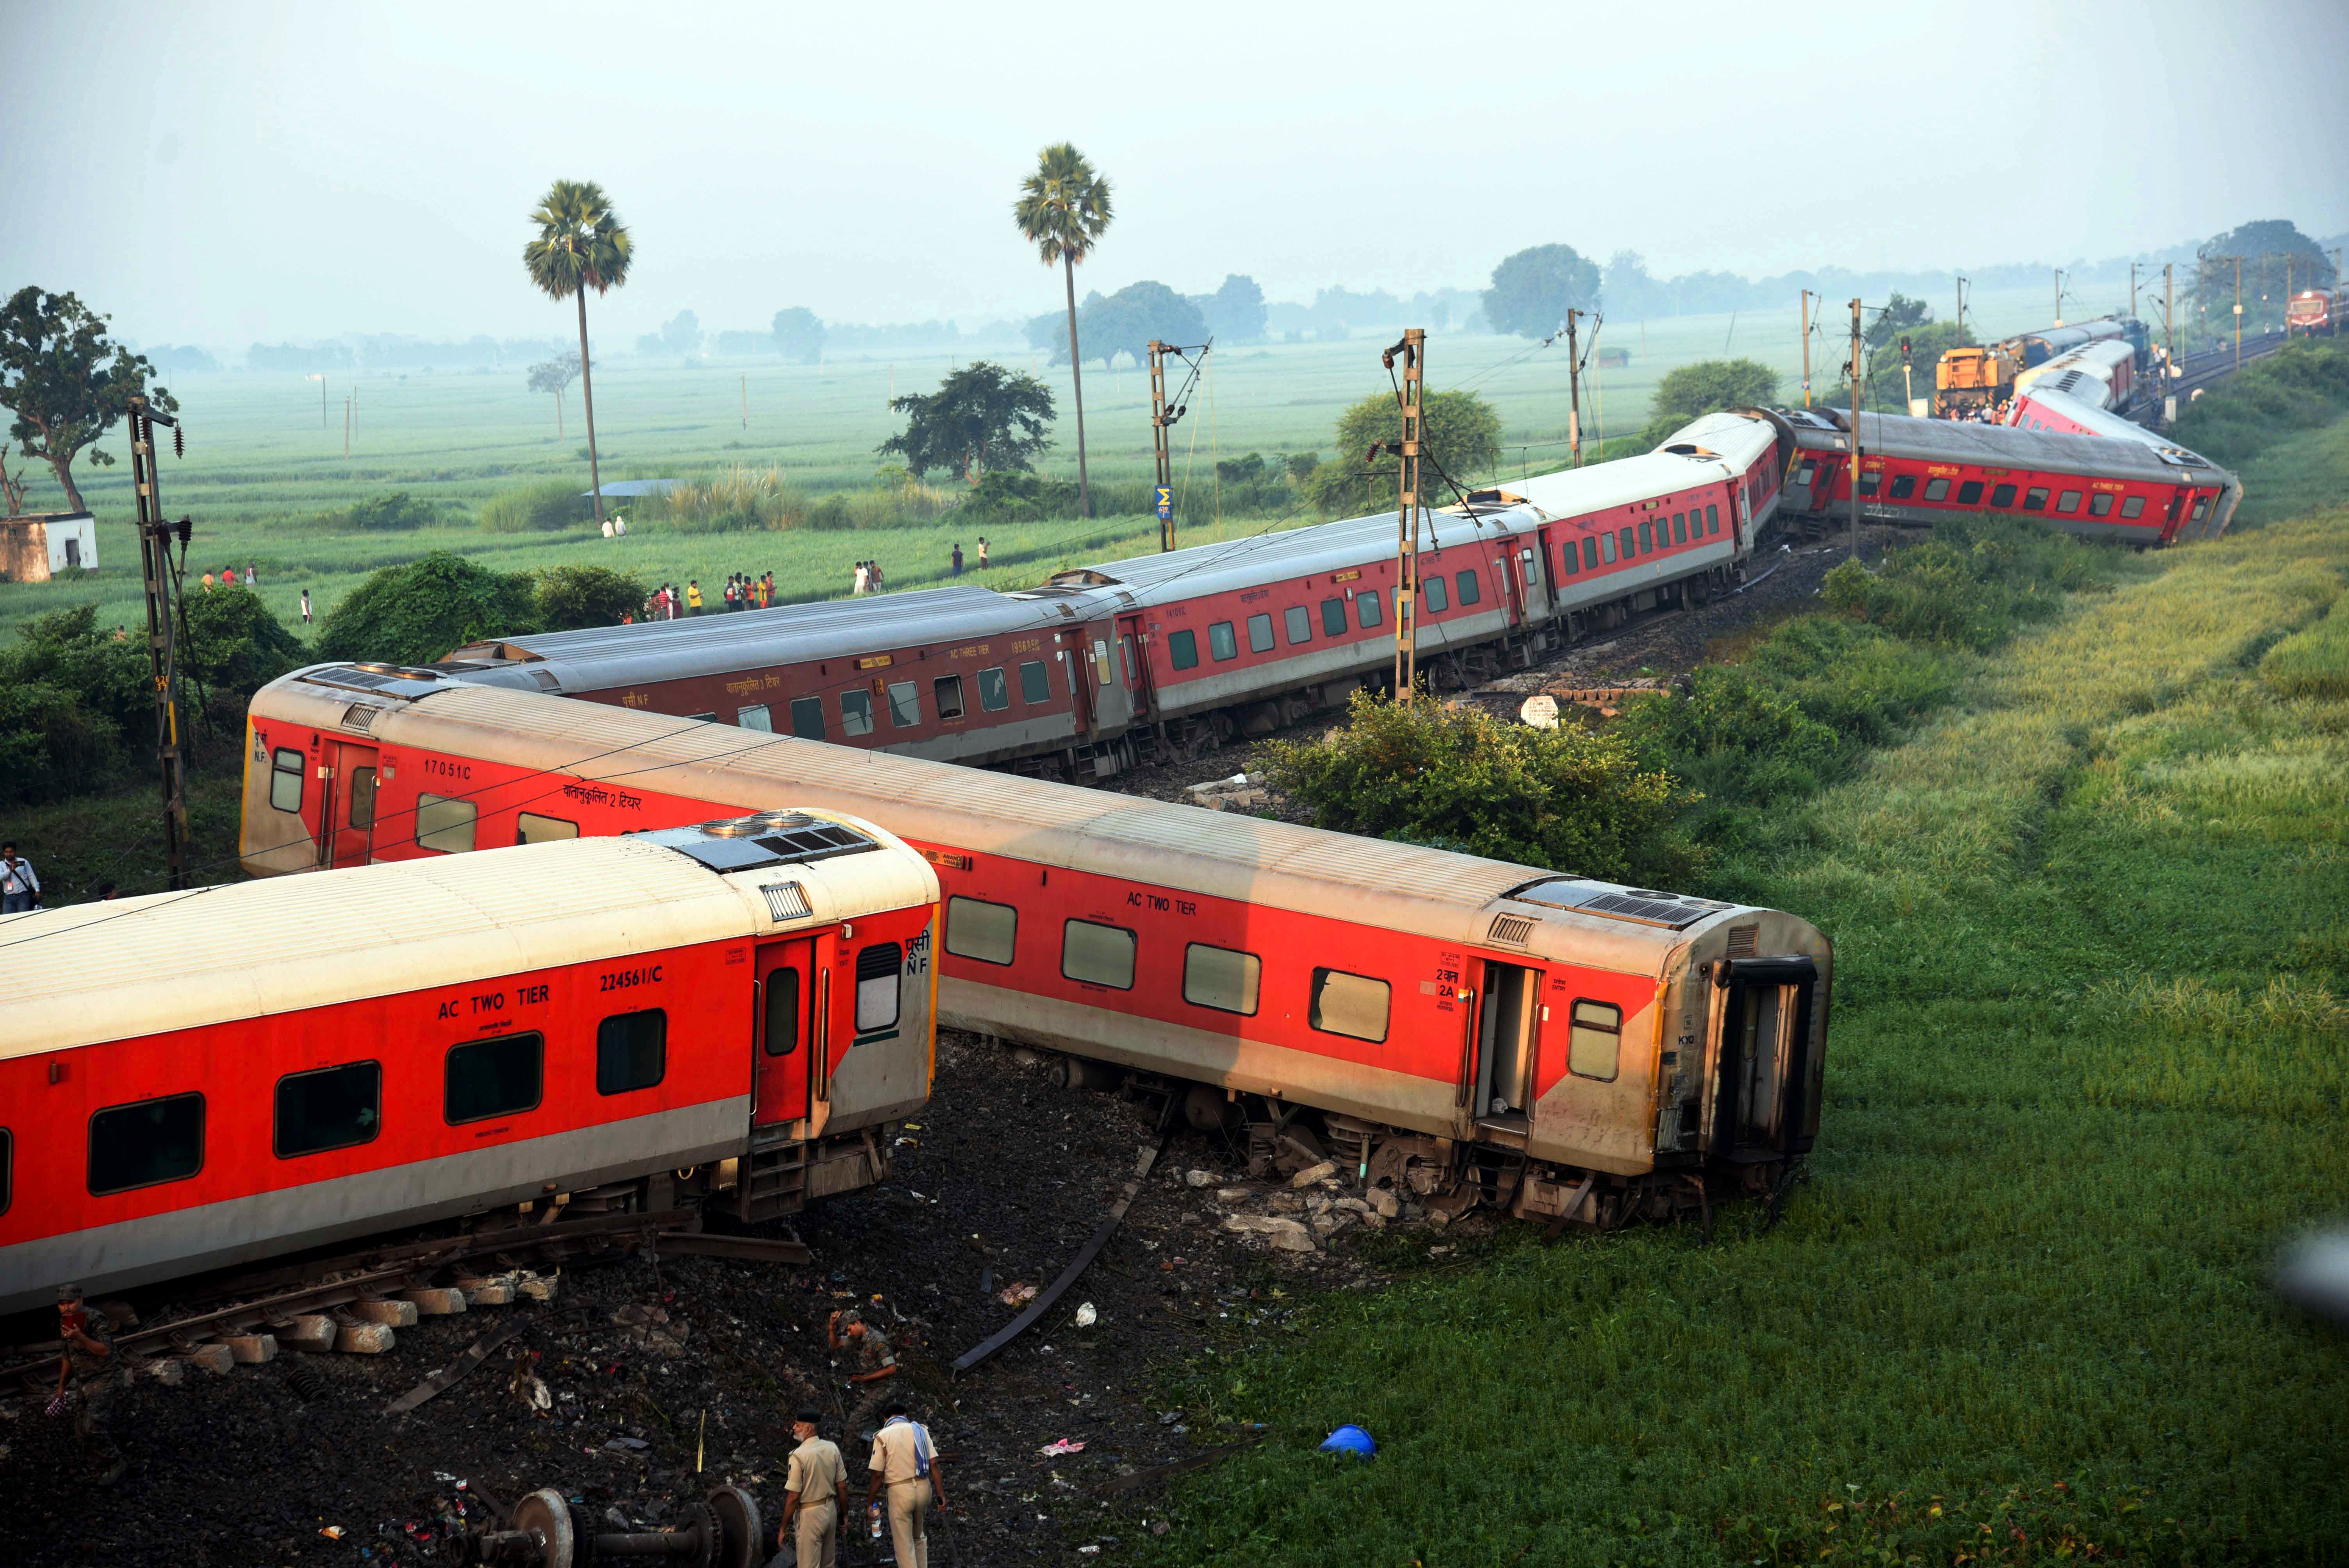 Coaches of the North-East Express passenger train that derailed in Bihar